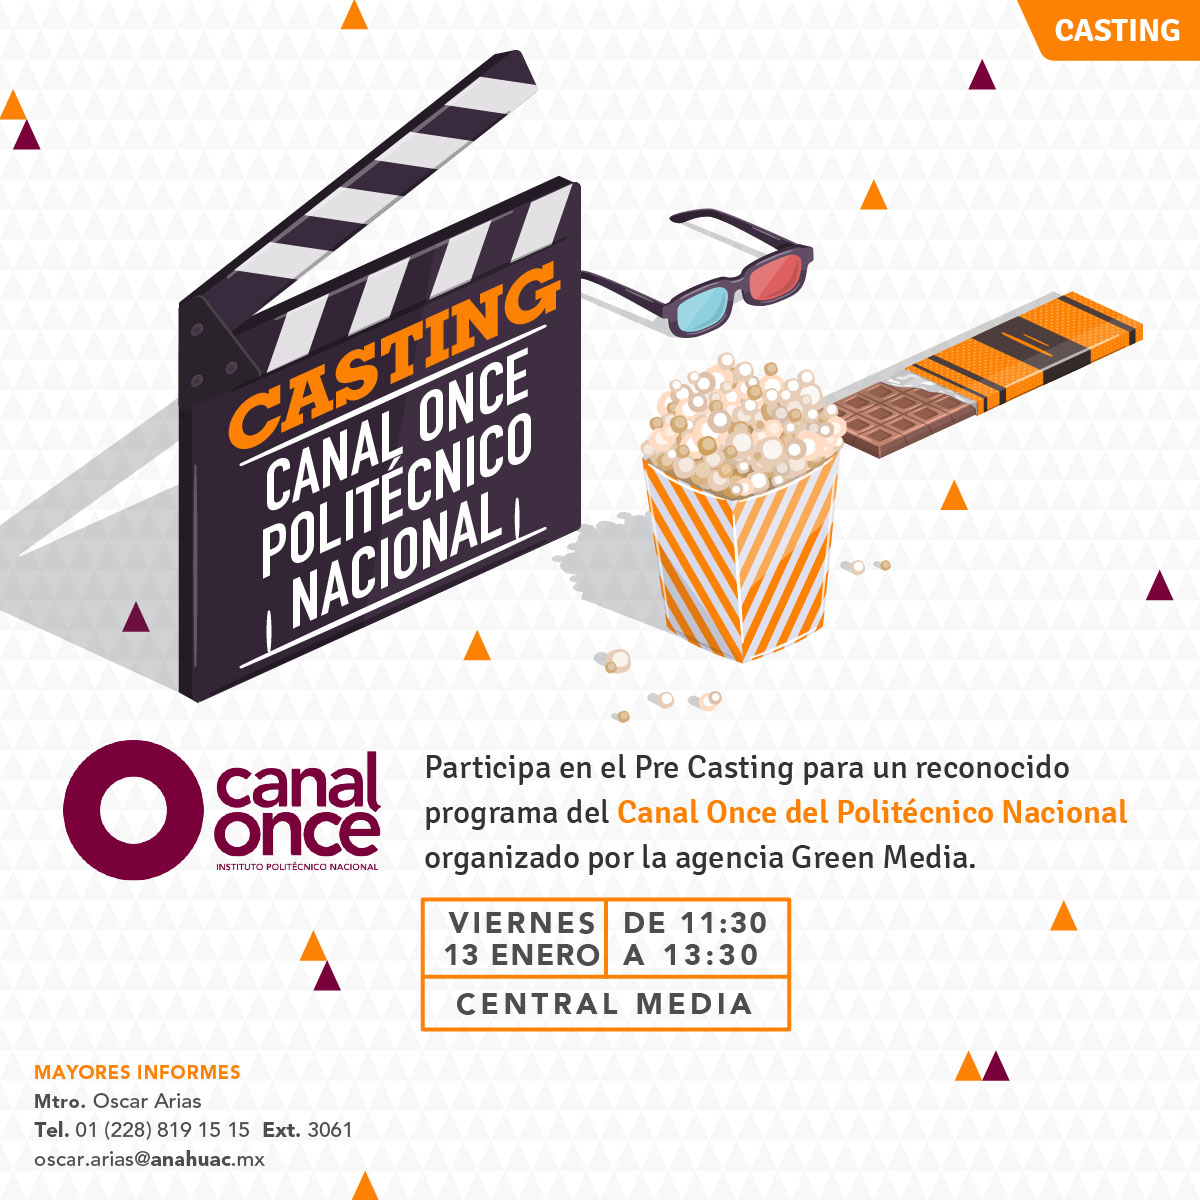 Casting: Canal Once IPN